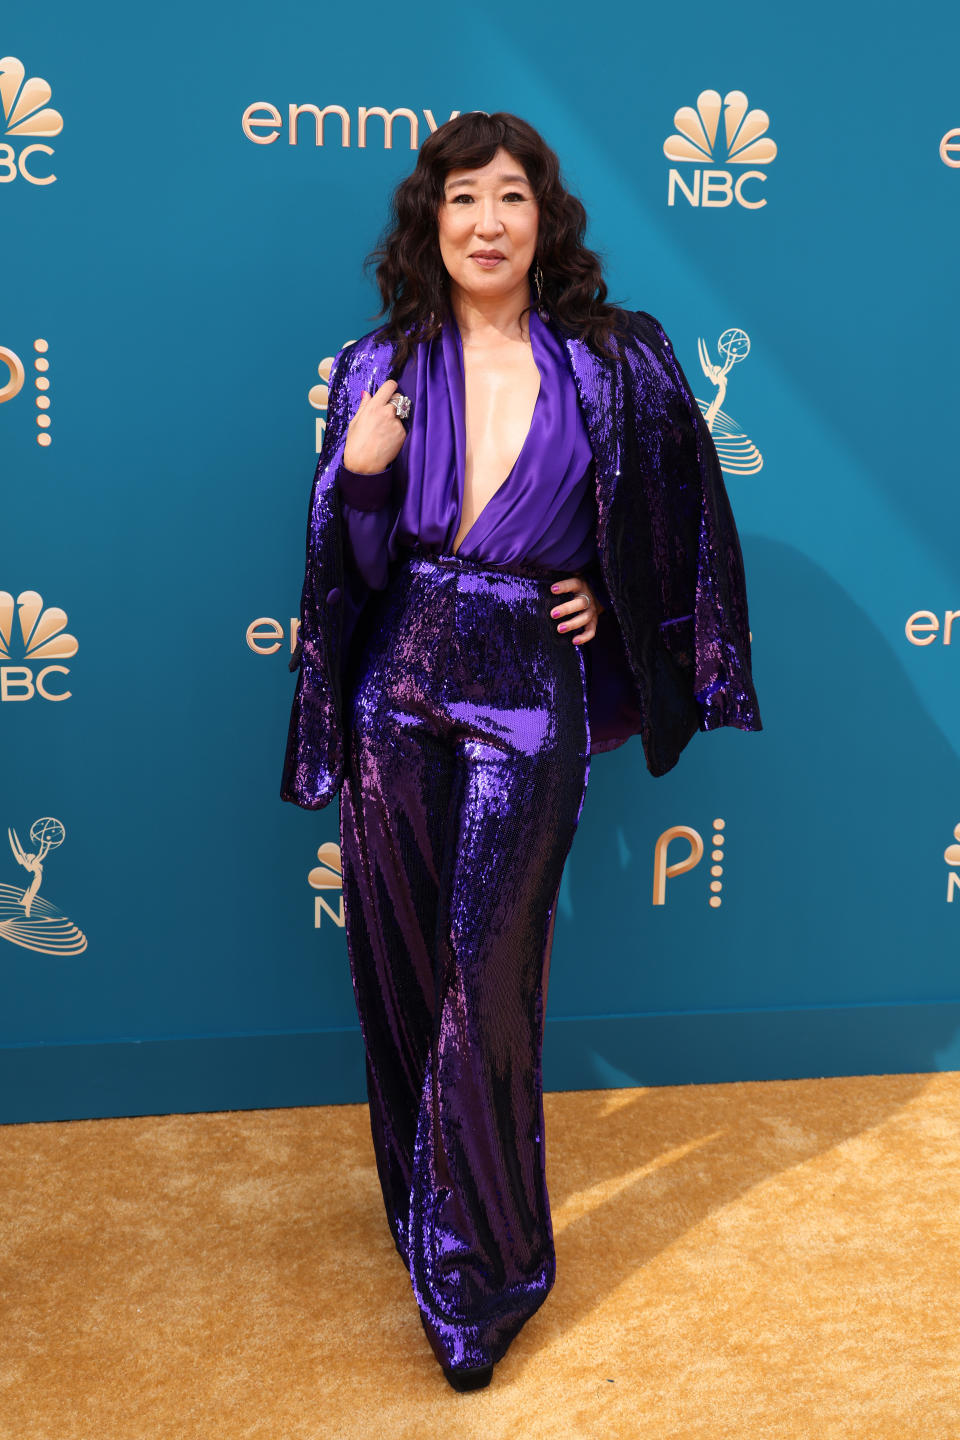 LOS ANGELES, CALIFORNIA - SEPTEMBER 12: 74th ANNUAL PRIMETIME EMMY AWARDS -- Pictured: Sandra Oh arrives to the 74th Annual Primetime Emmy Awards held at the Microsoft Theater on September 12, 2022. -- (Photo by Mark Von Holden/NBC via Getty Images)